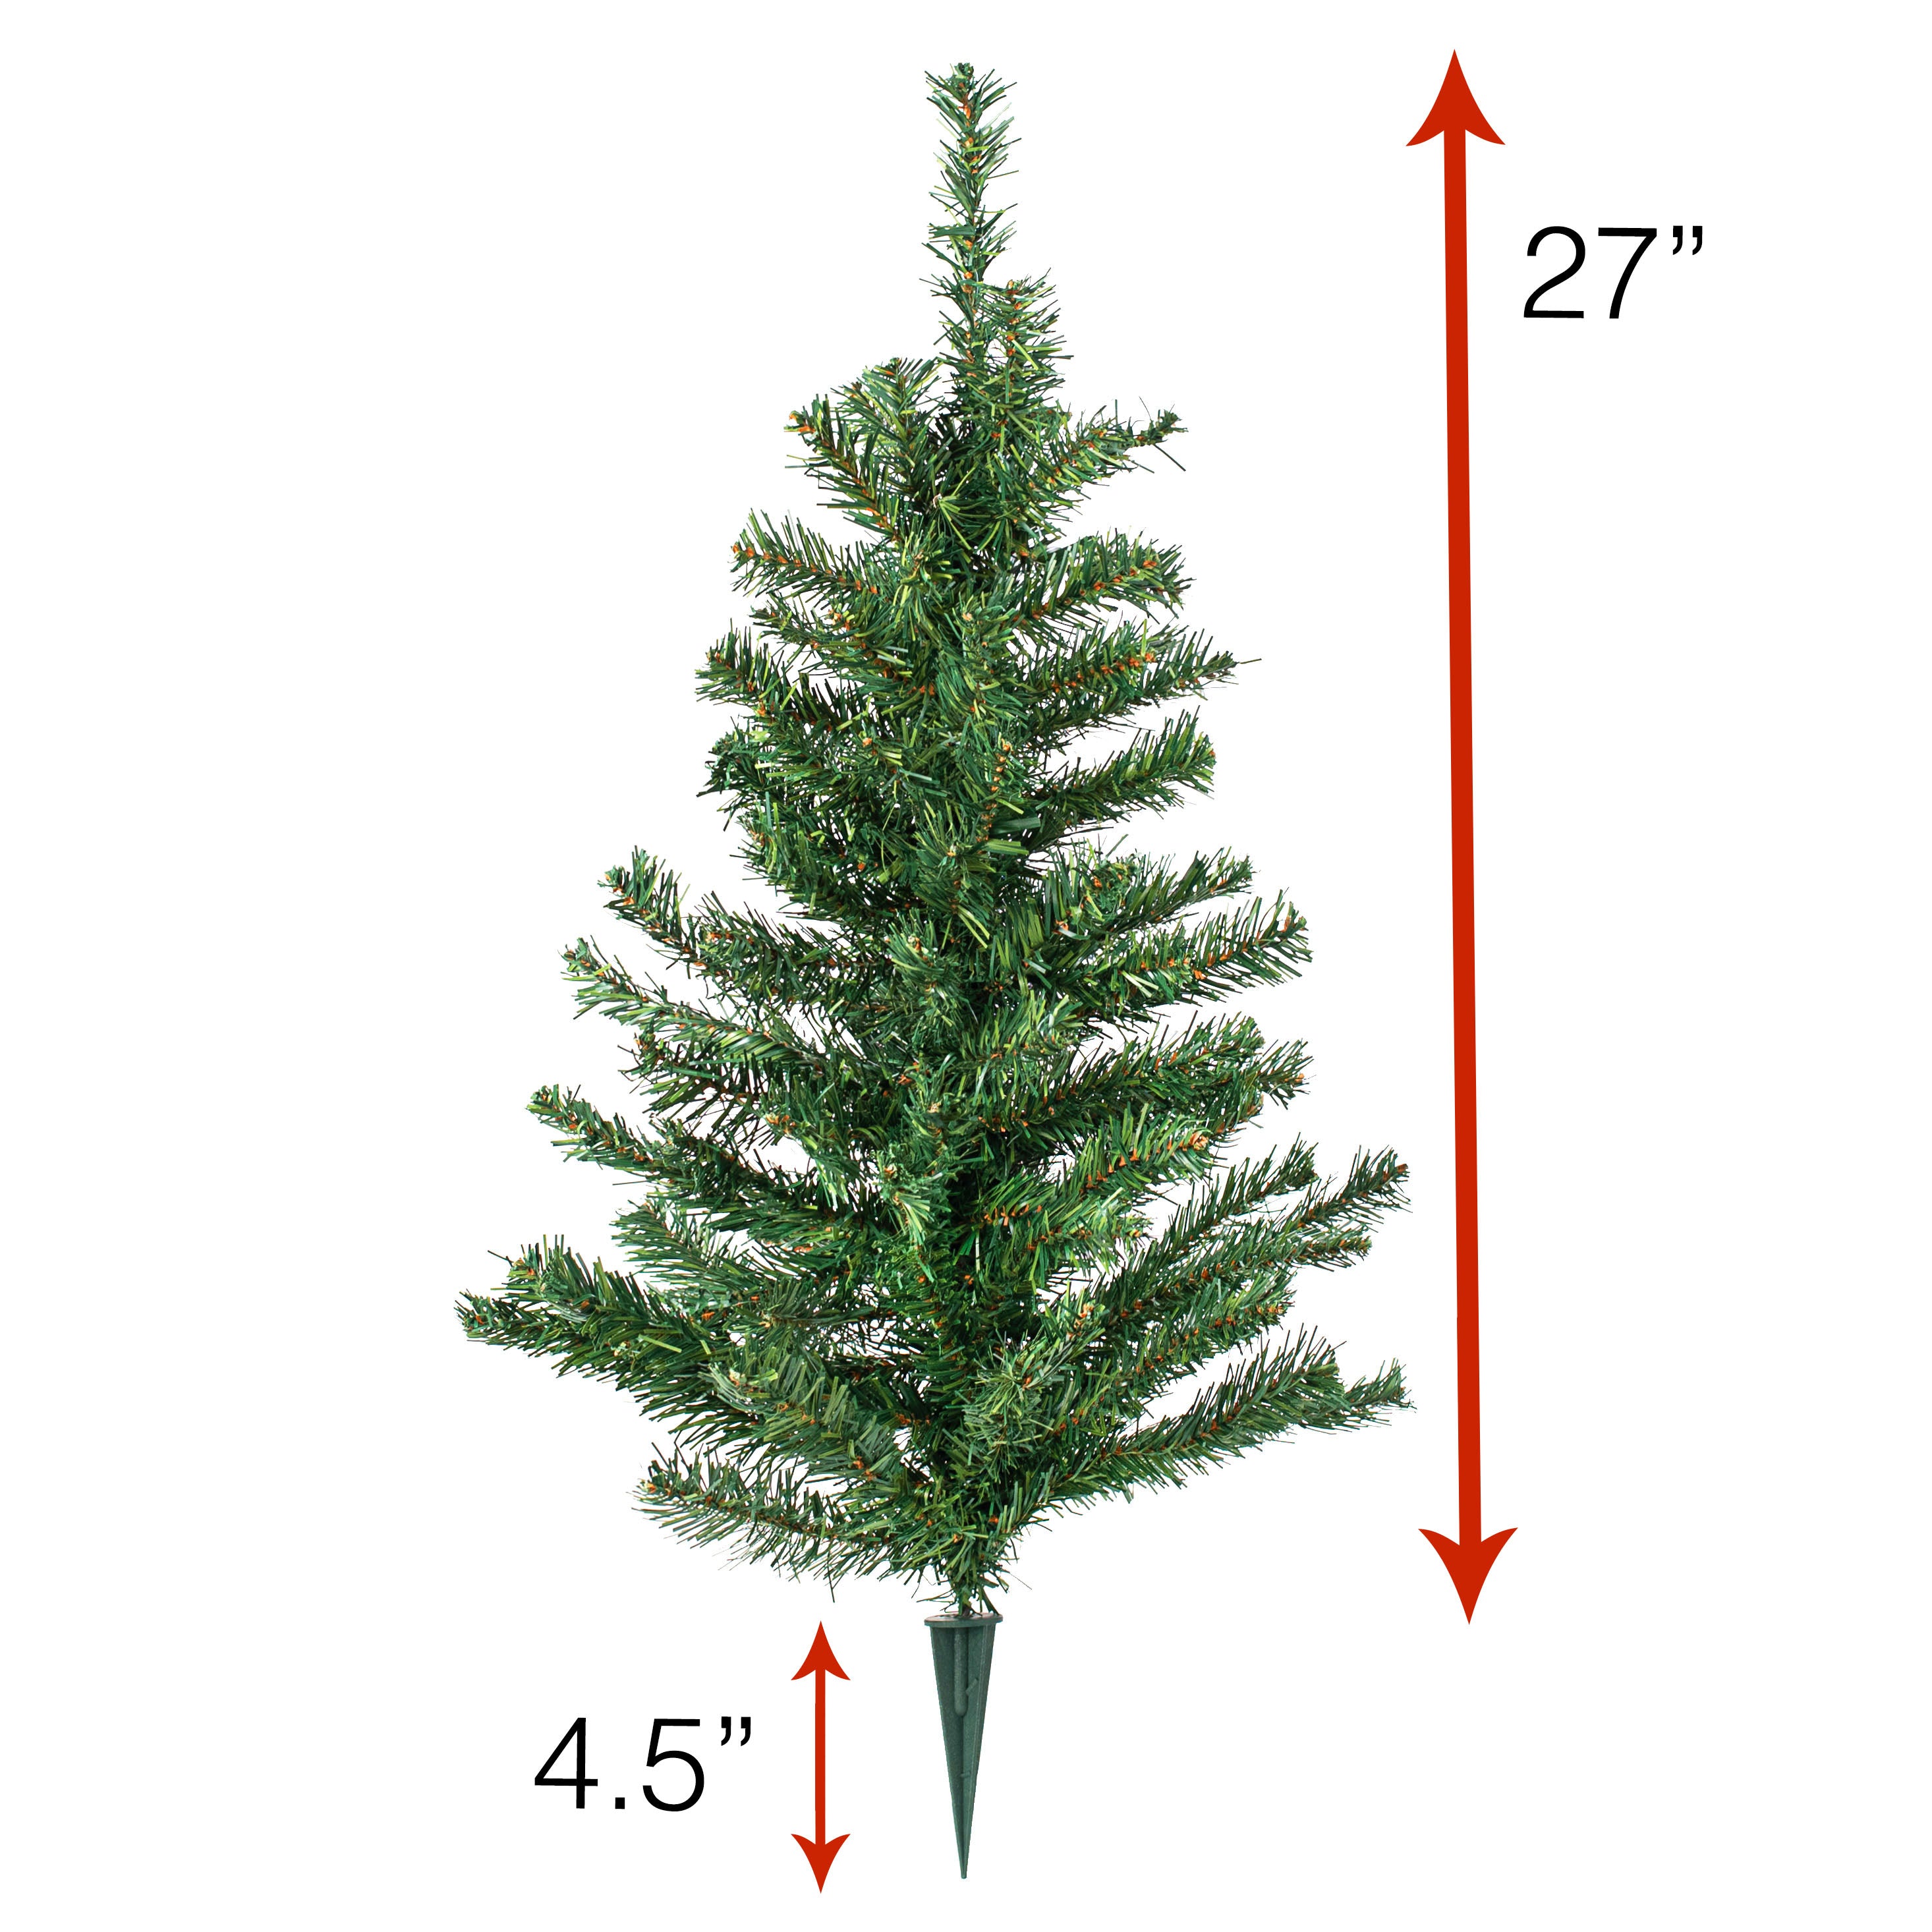 30" Small Cemetery Pine Tree With Plastic Spike